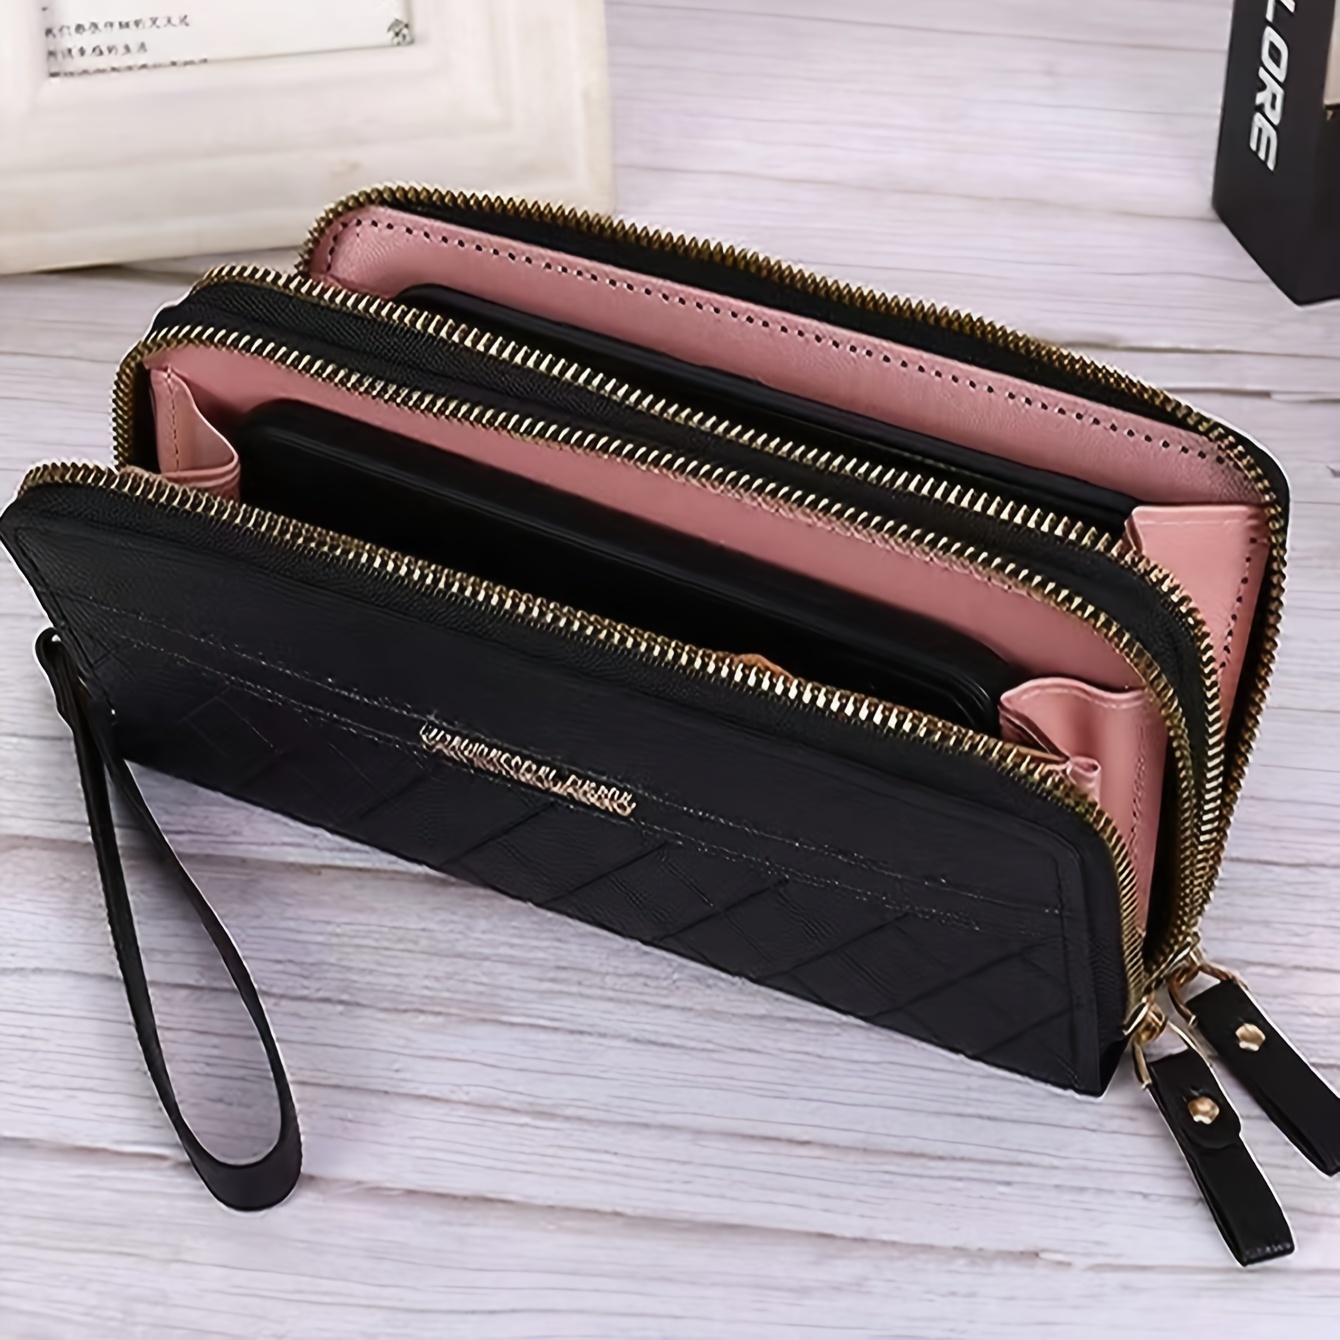 

Double Zipper Closure Long Wallet For Women, Large Capacity Cash Coin Purse, Fashionable Wristlet, Multi-functional Phone Bag For Travel, Birthday Gift, Anniversary, Valentine's Day